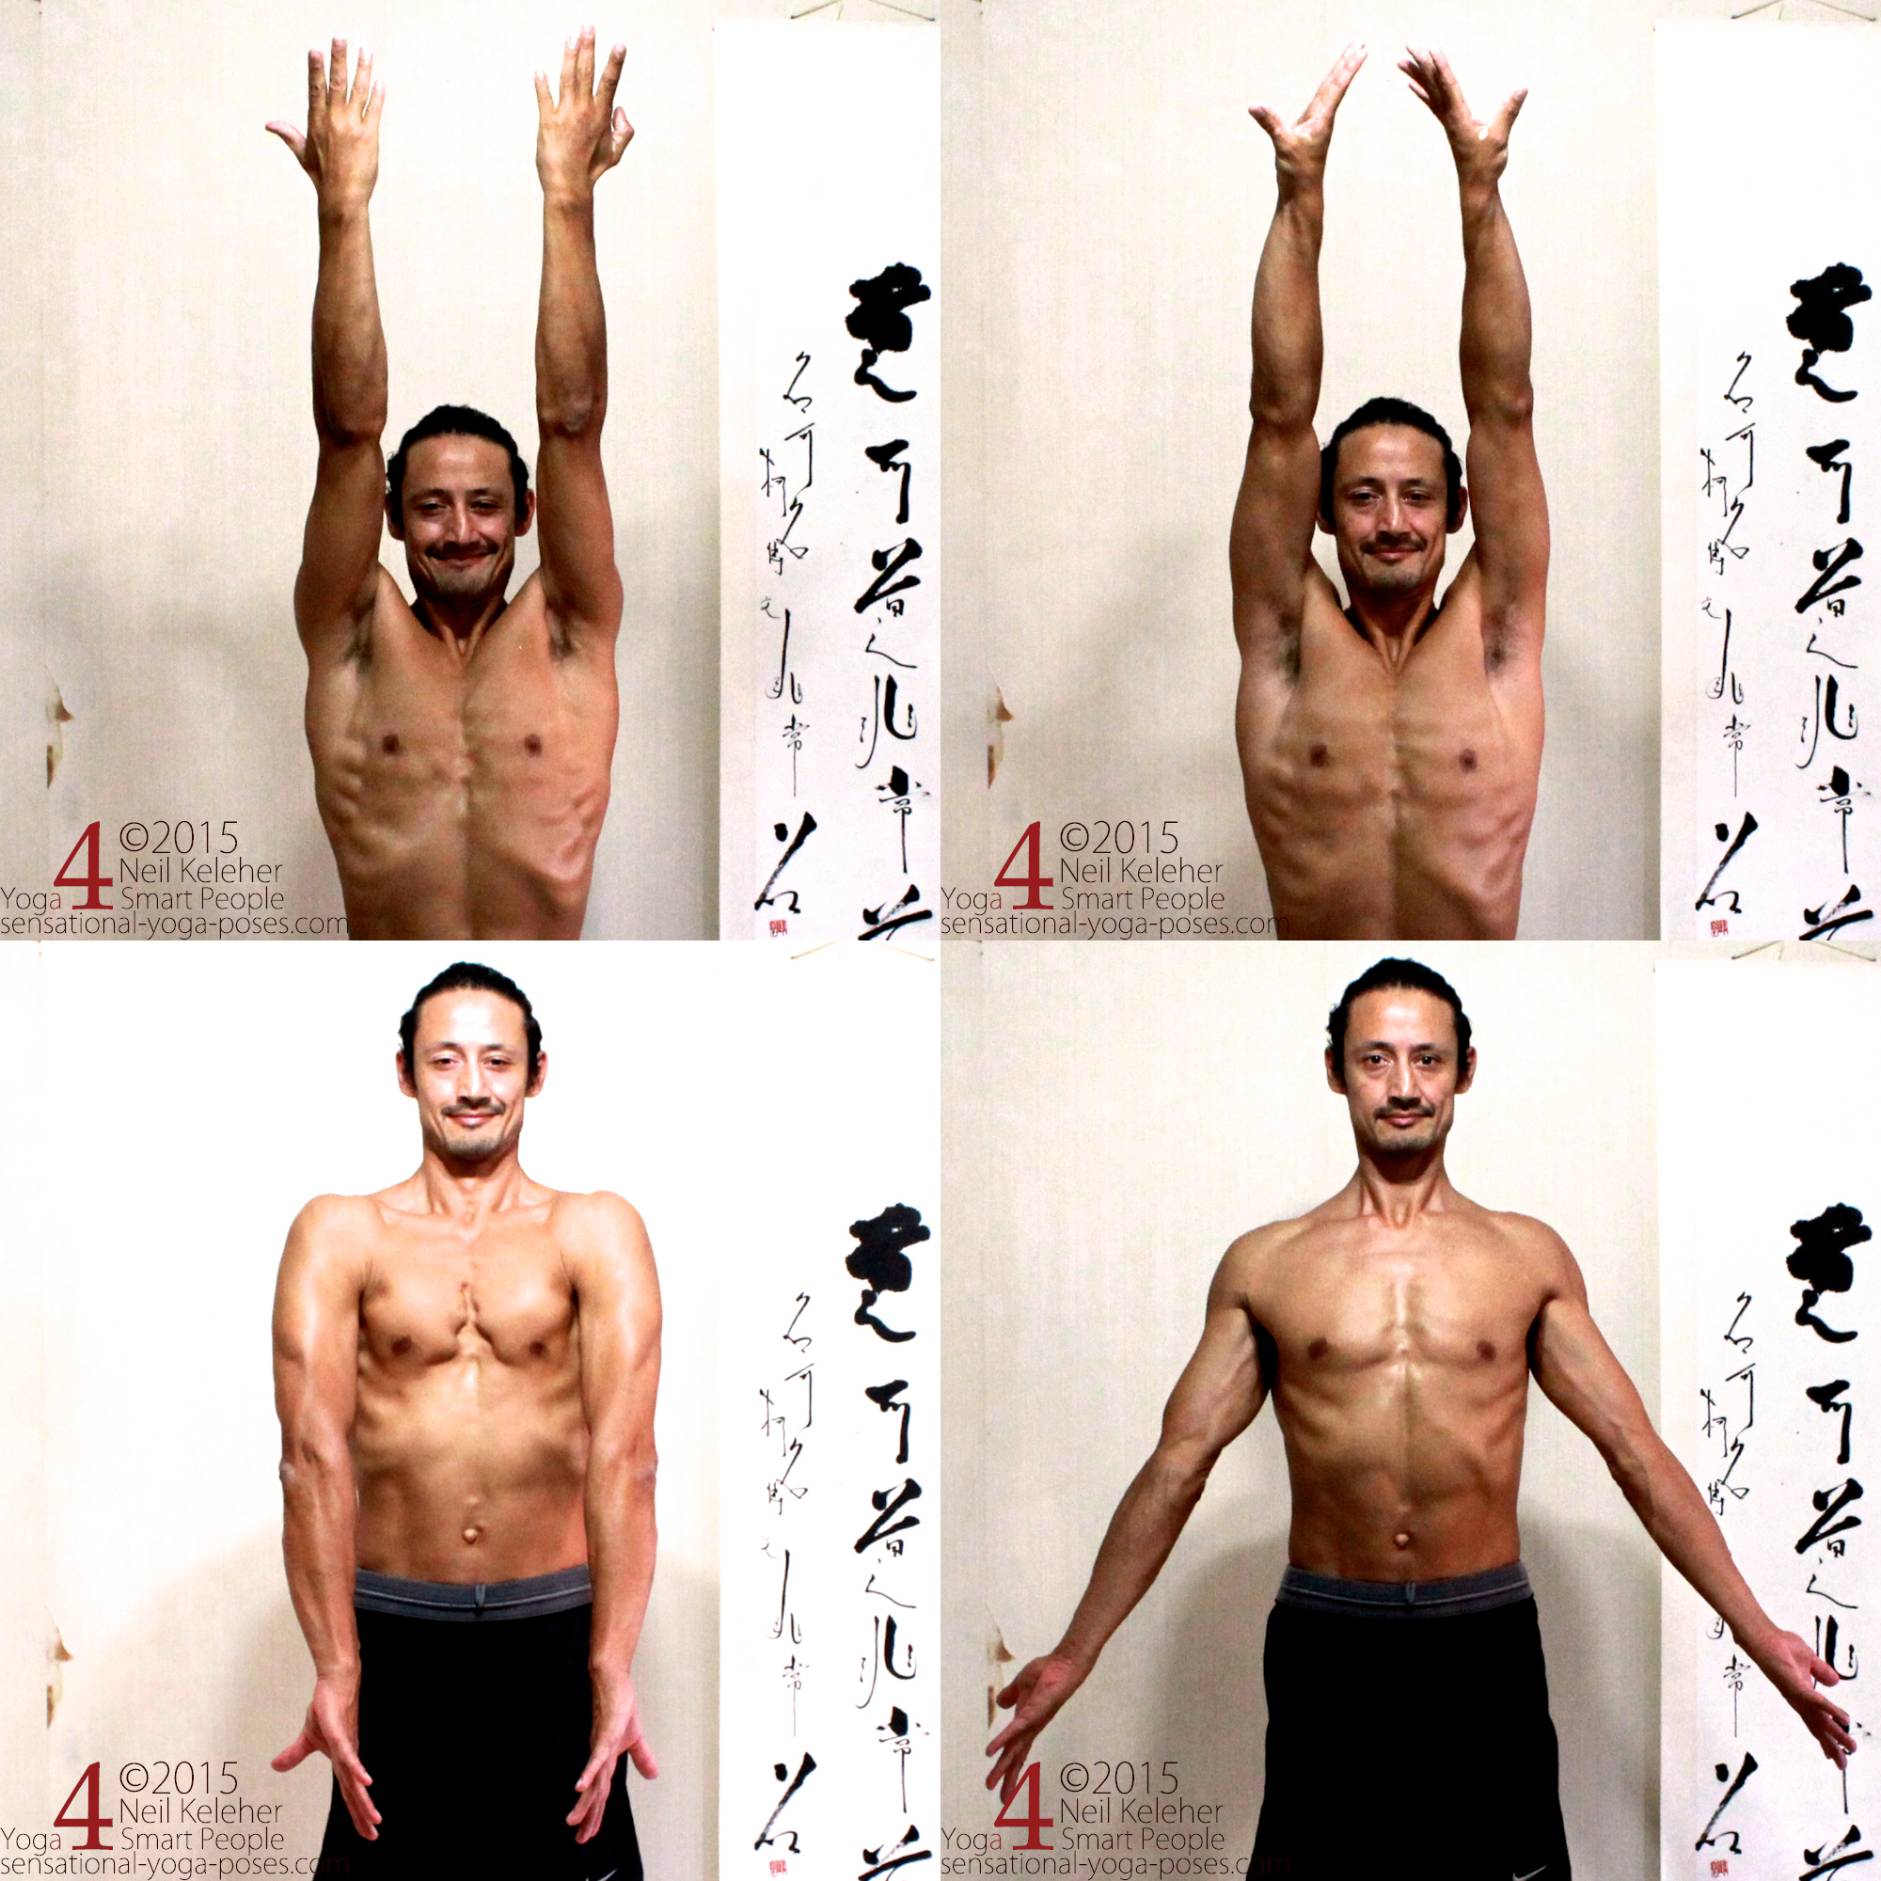 Arms up with external rotation, then internal rotation,  
Arms down with internal rotation, then external rotation.